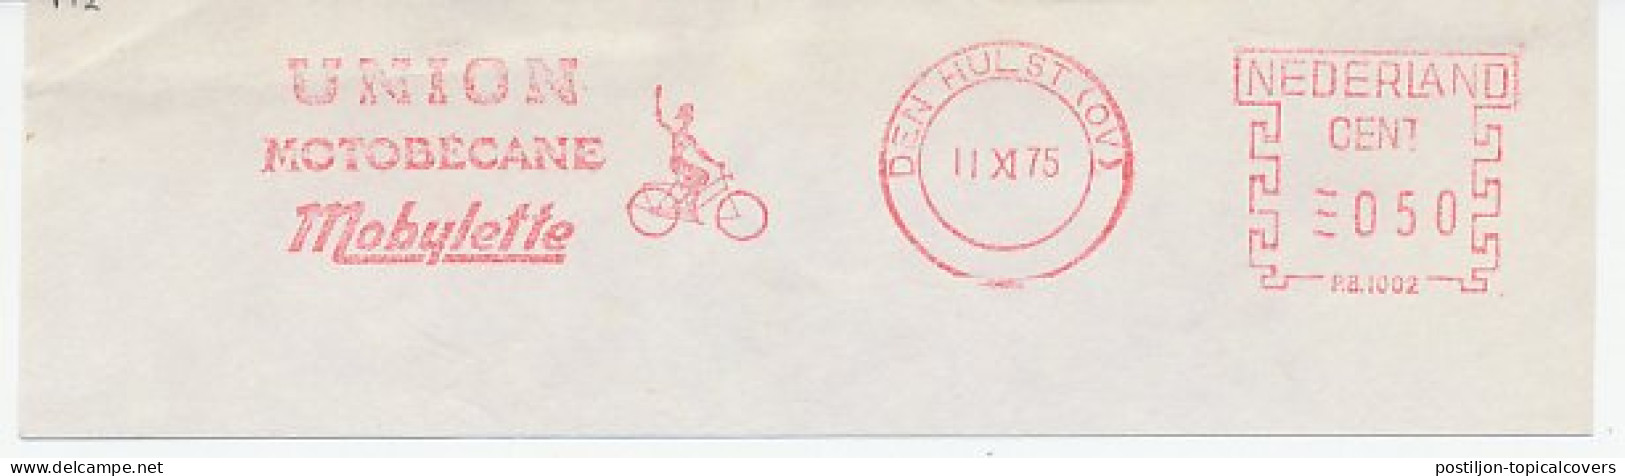 Meter Cut Netherlands 1975 Bicycle - Union - Motobecane - Mobylette - Ciclismo